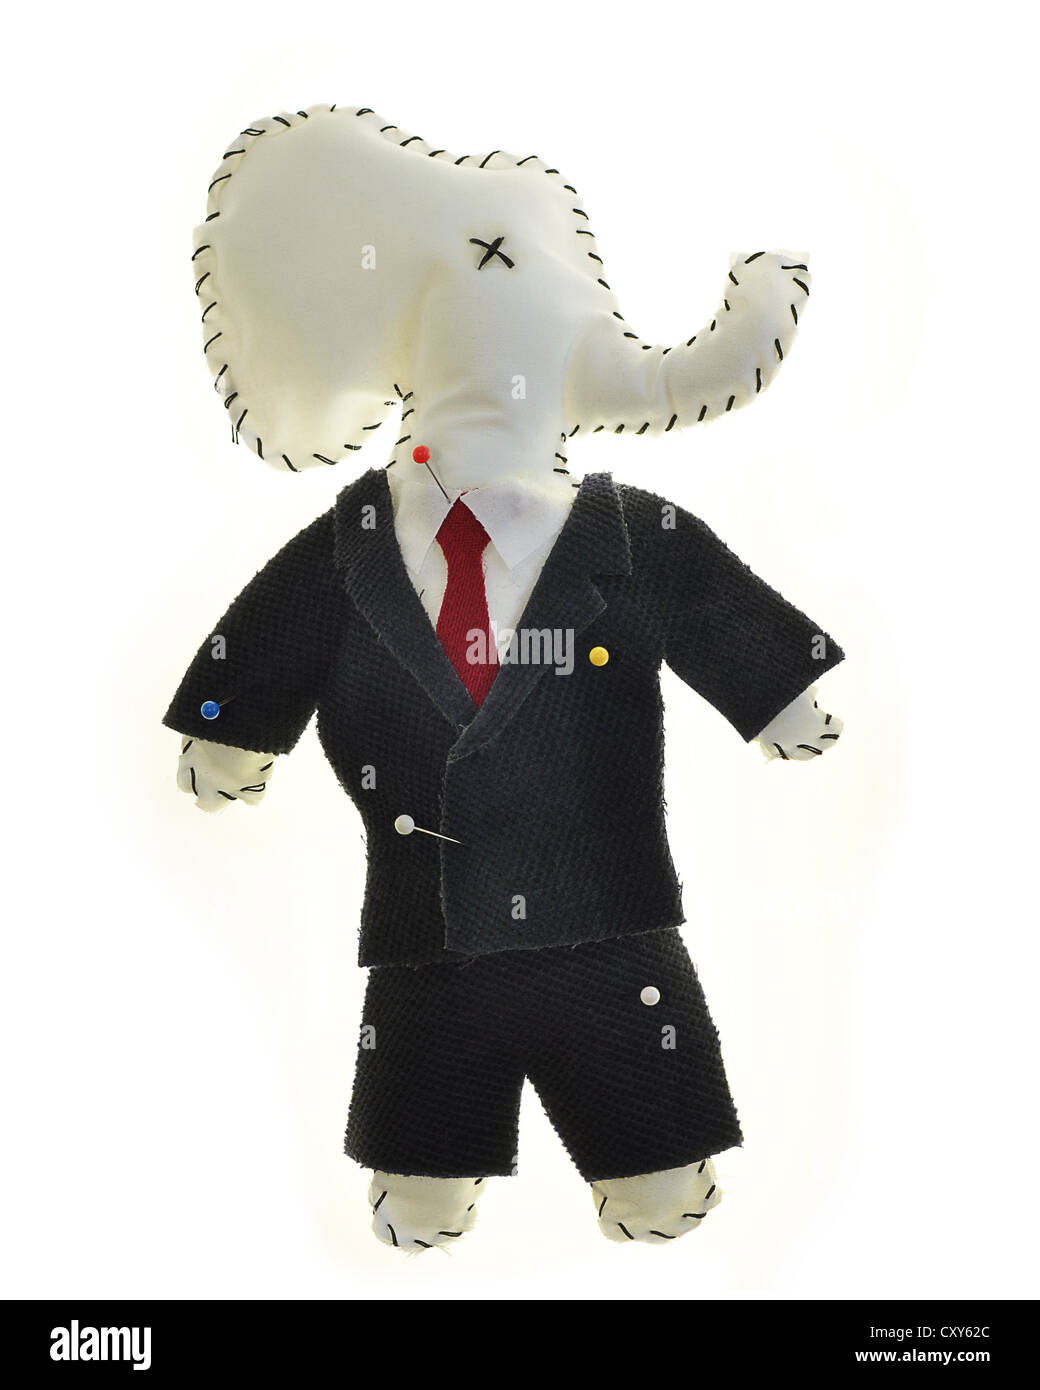 Concept Photo of a Home Made Voodoo Doll in the Shape of the Republican Elephant on White Stock Photo